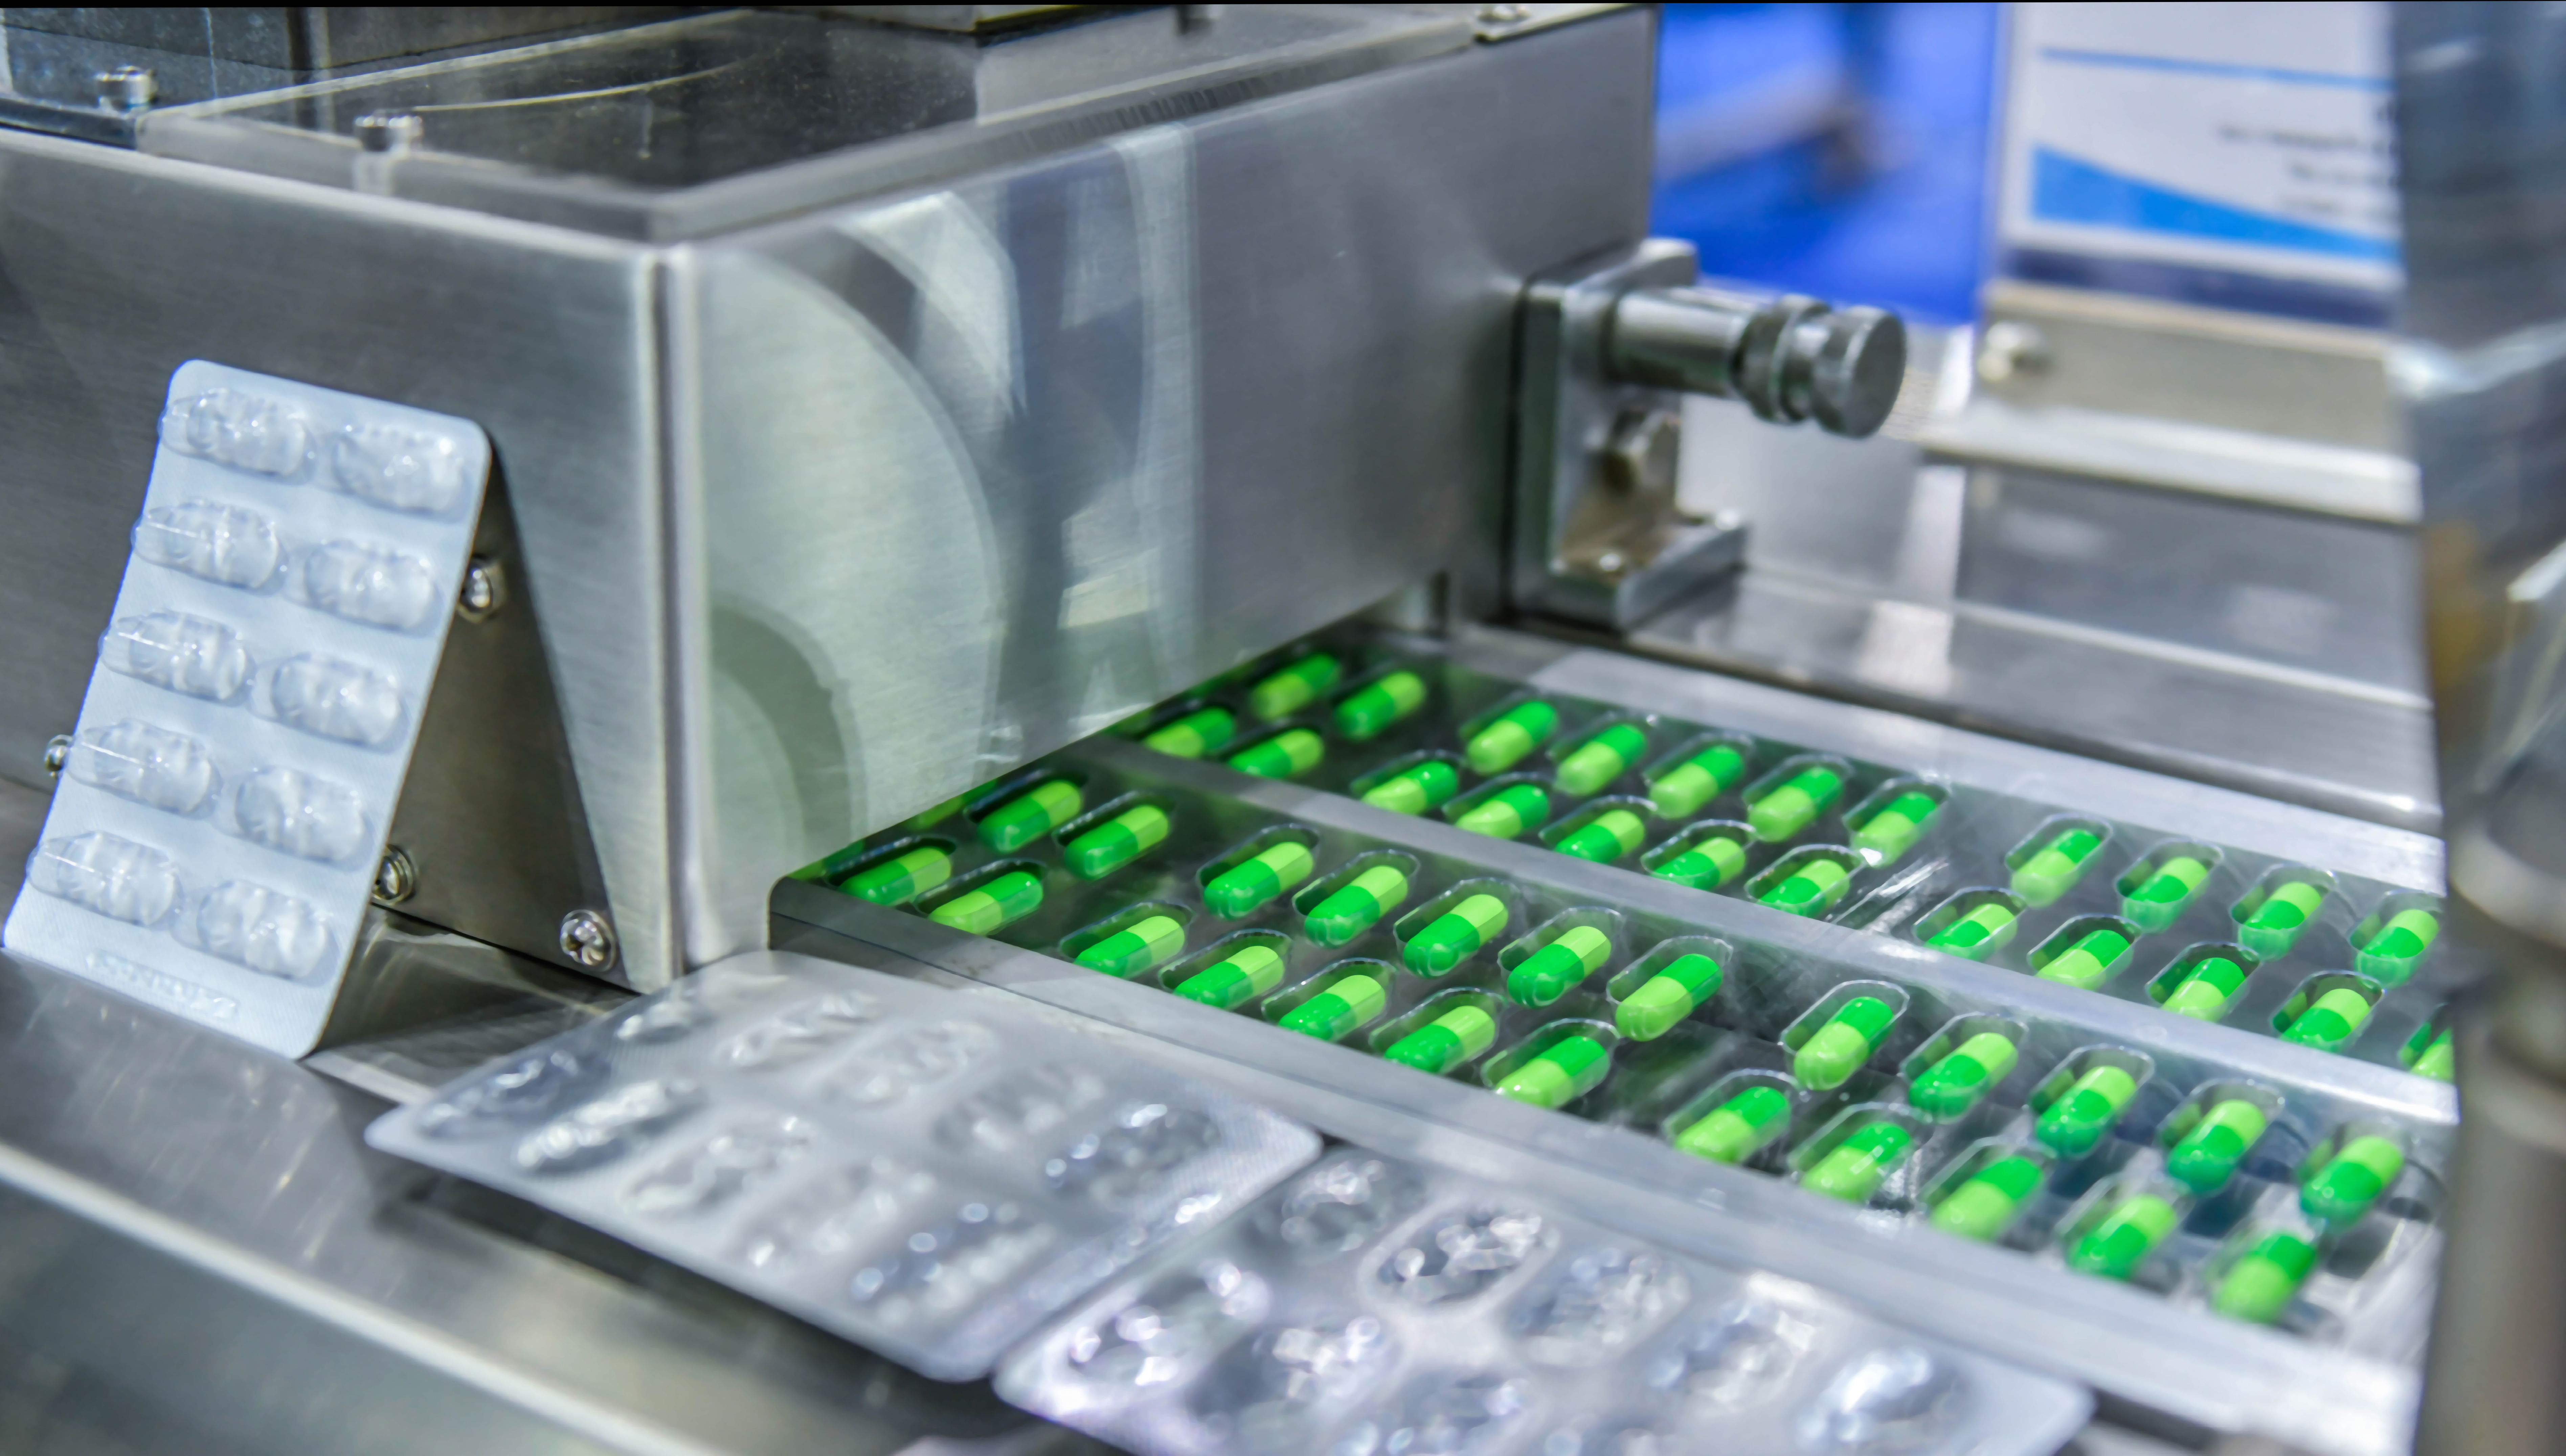 Optimal Industrial Automation developed new blister pack inspection machines consisting of two vision systems to support a tablet manufacturer that was surprised by a sudden breakdown (Image source: iStock: 1285400923)